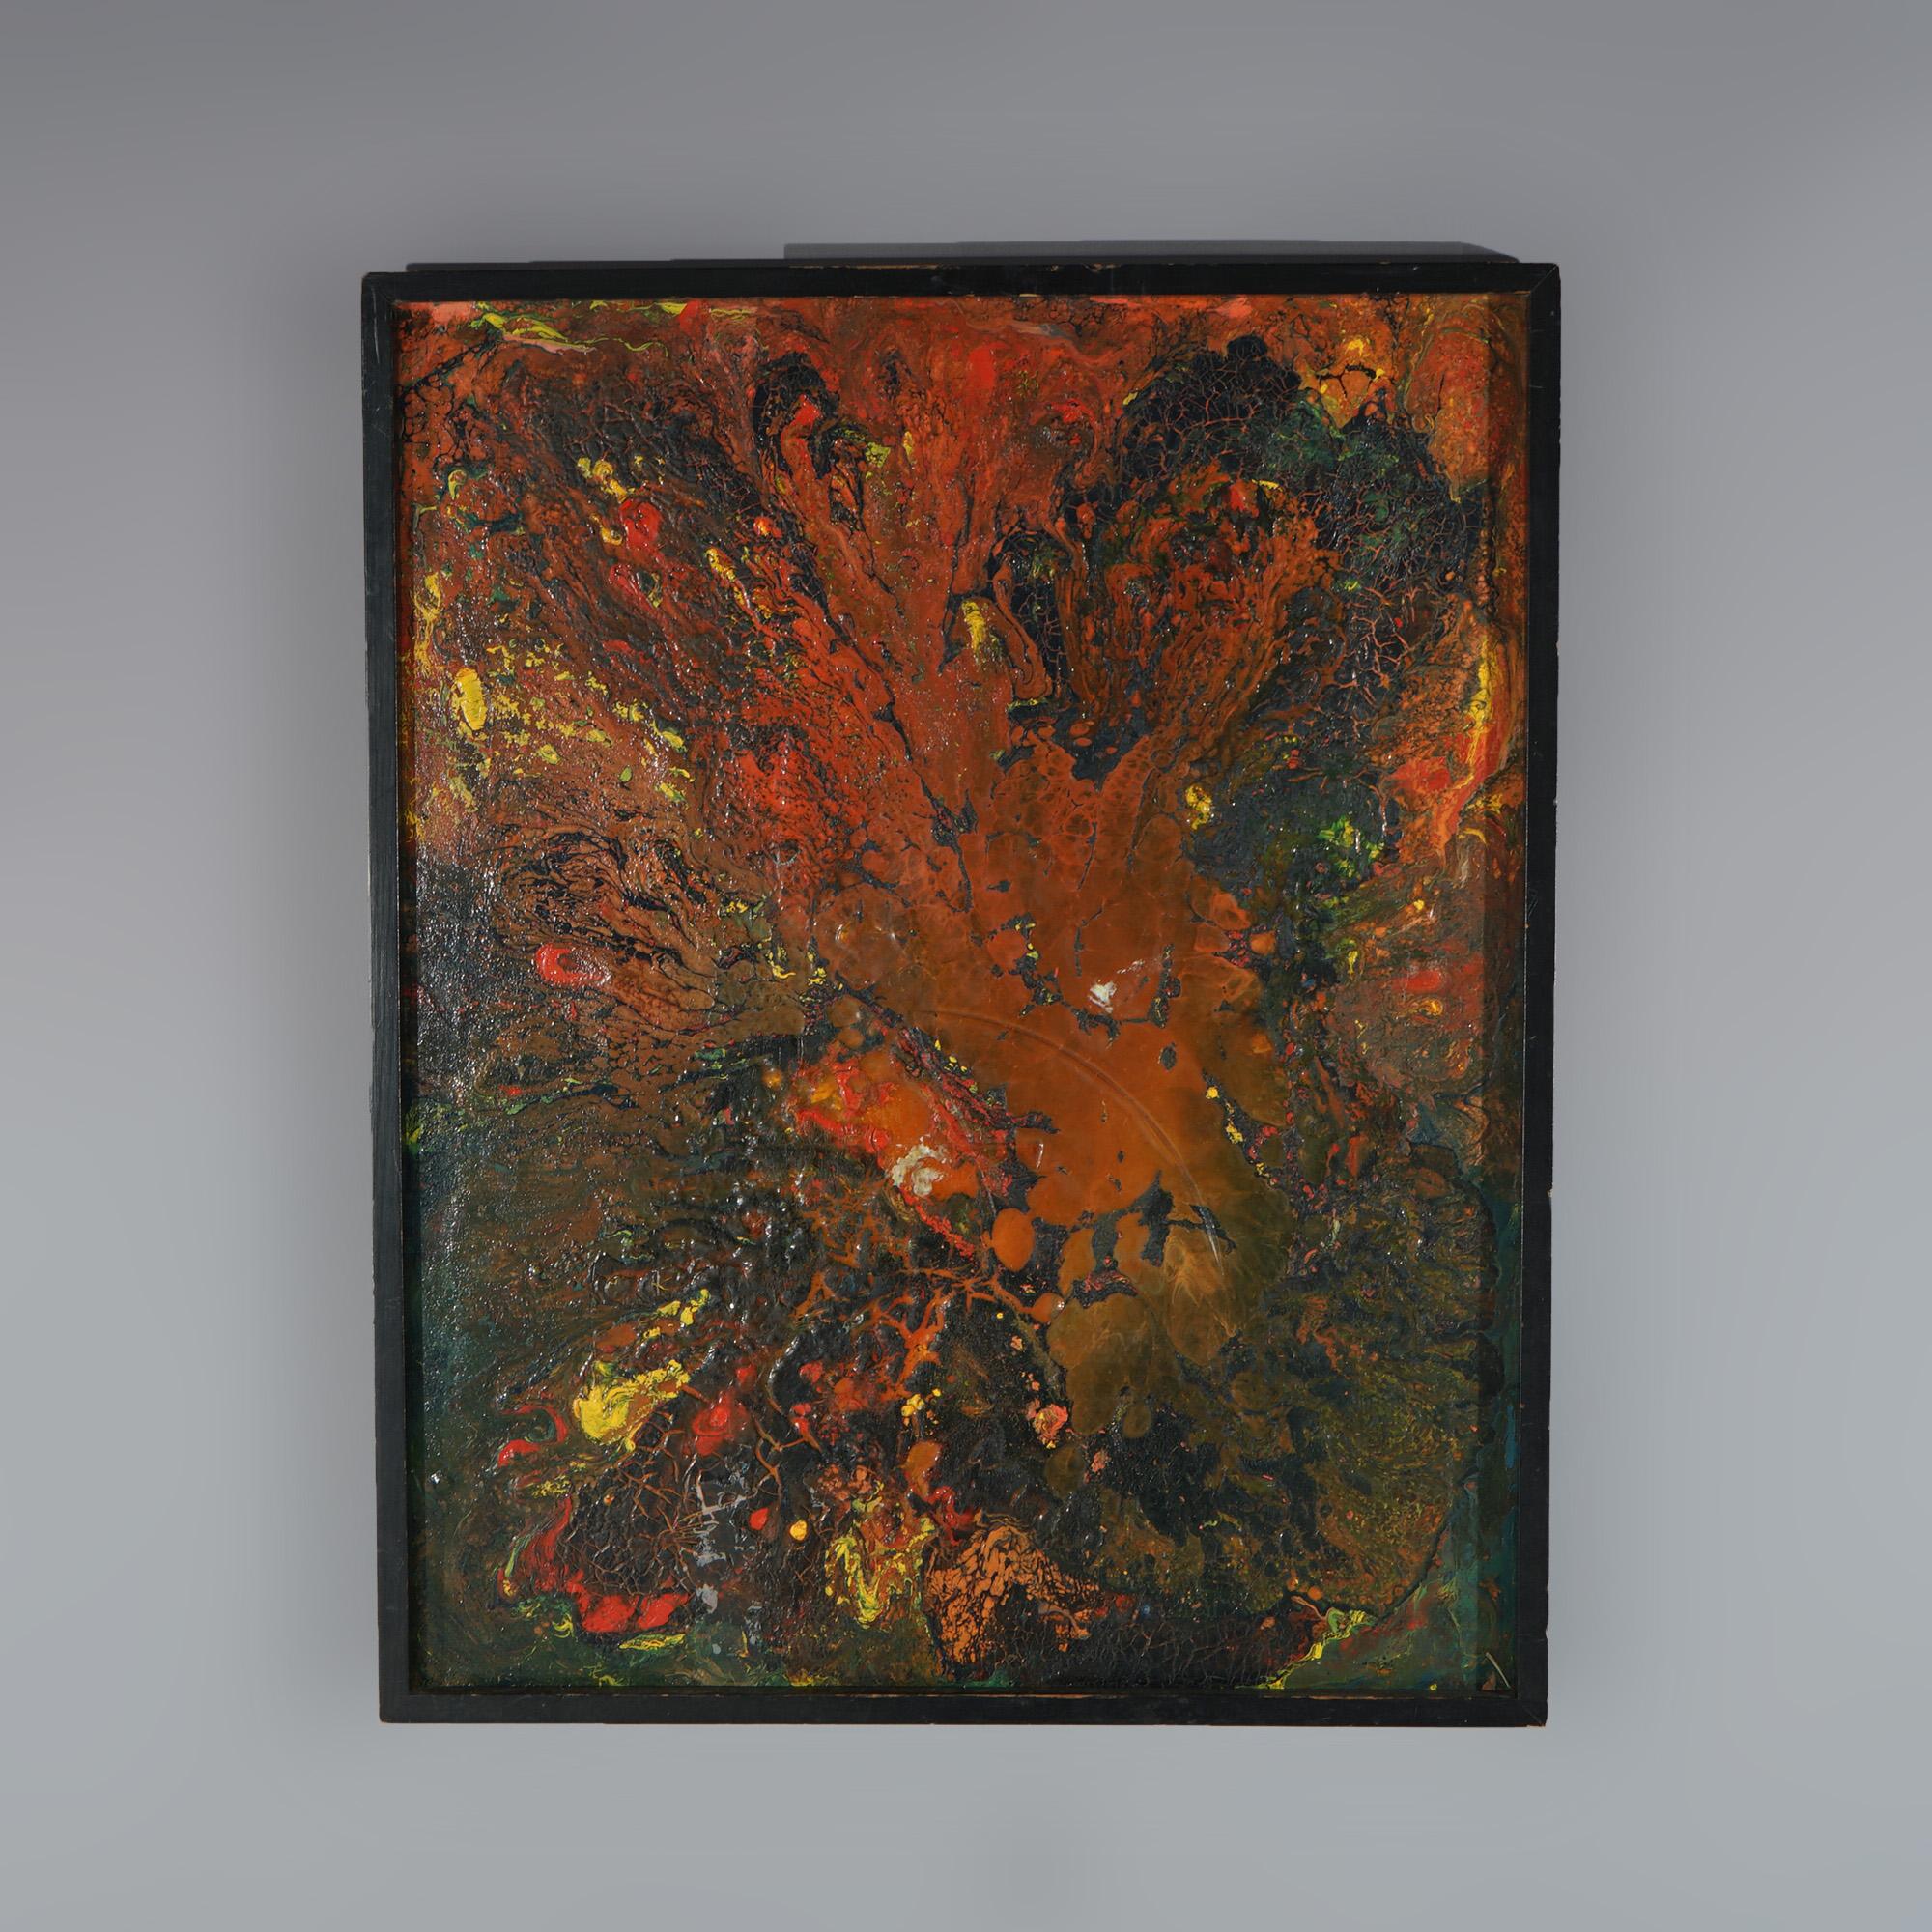 A Mid-Century Modern abstract oil on canvas painting by Beverly Goldman, signed en verso as photographed, c1960

Measures - 31